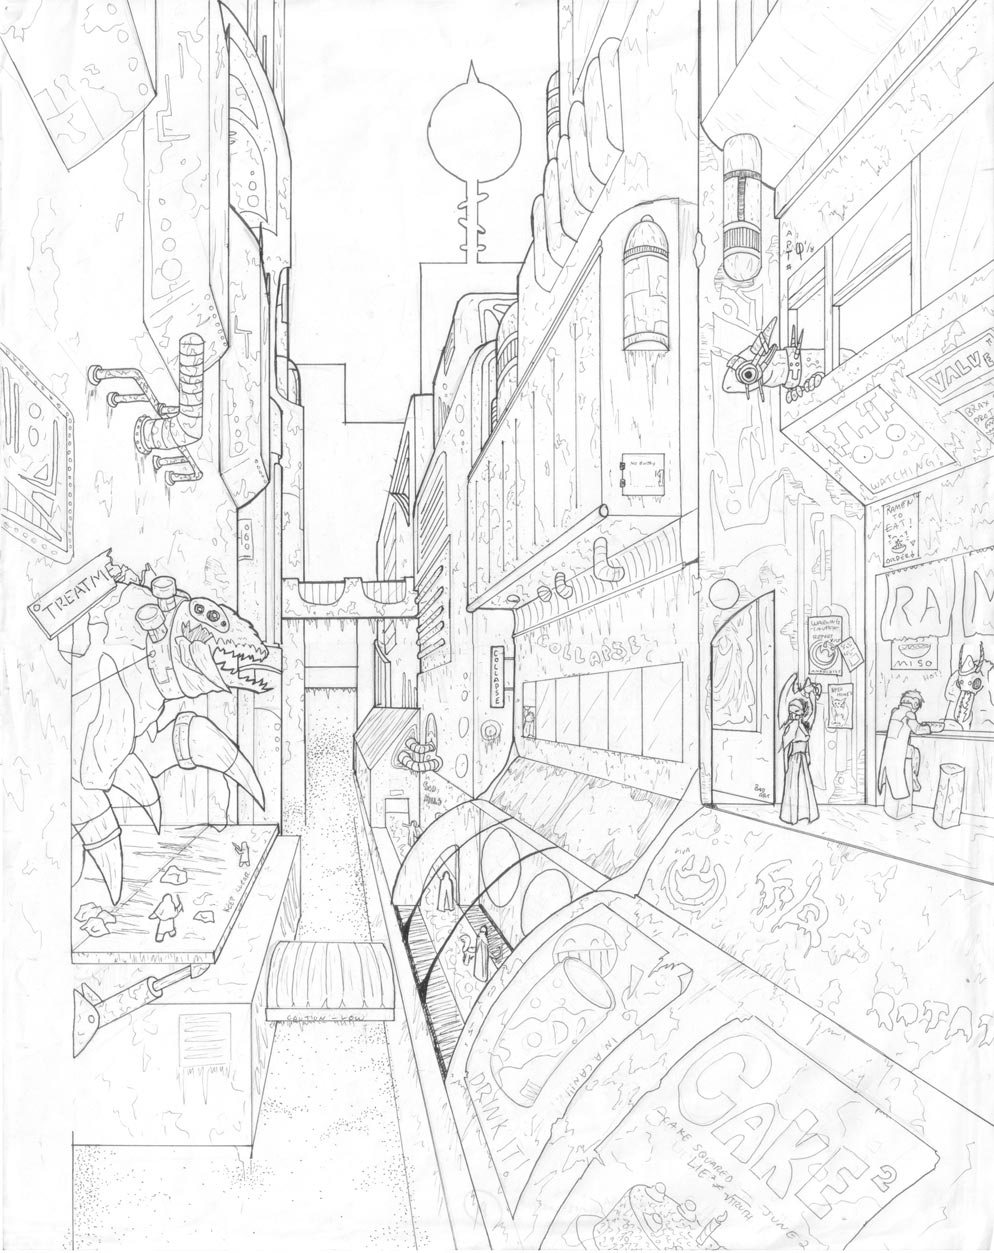 double perspective drawing ny by nilsgermain on DeviantArt